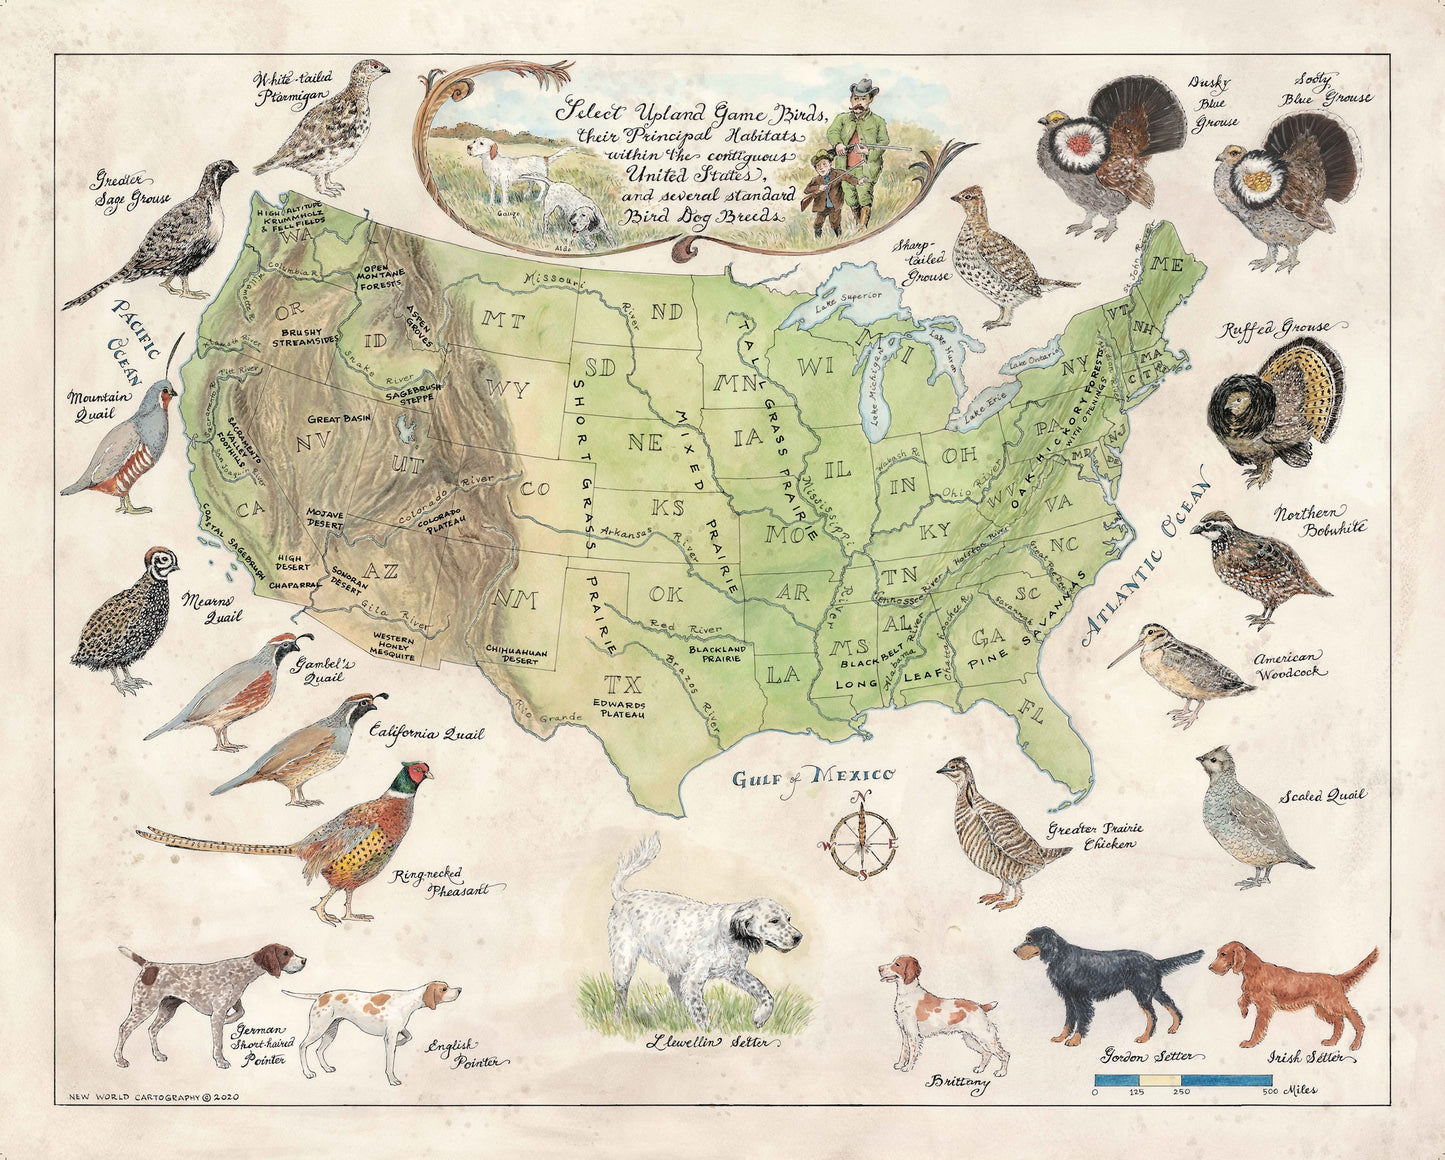 Upland Game Birds of the United States and select pointing dog breeds